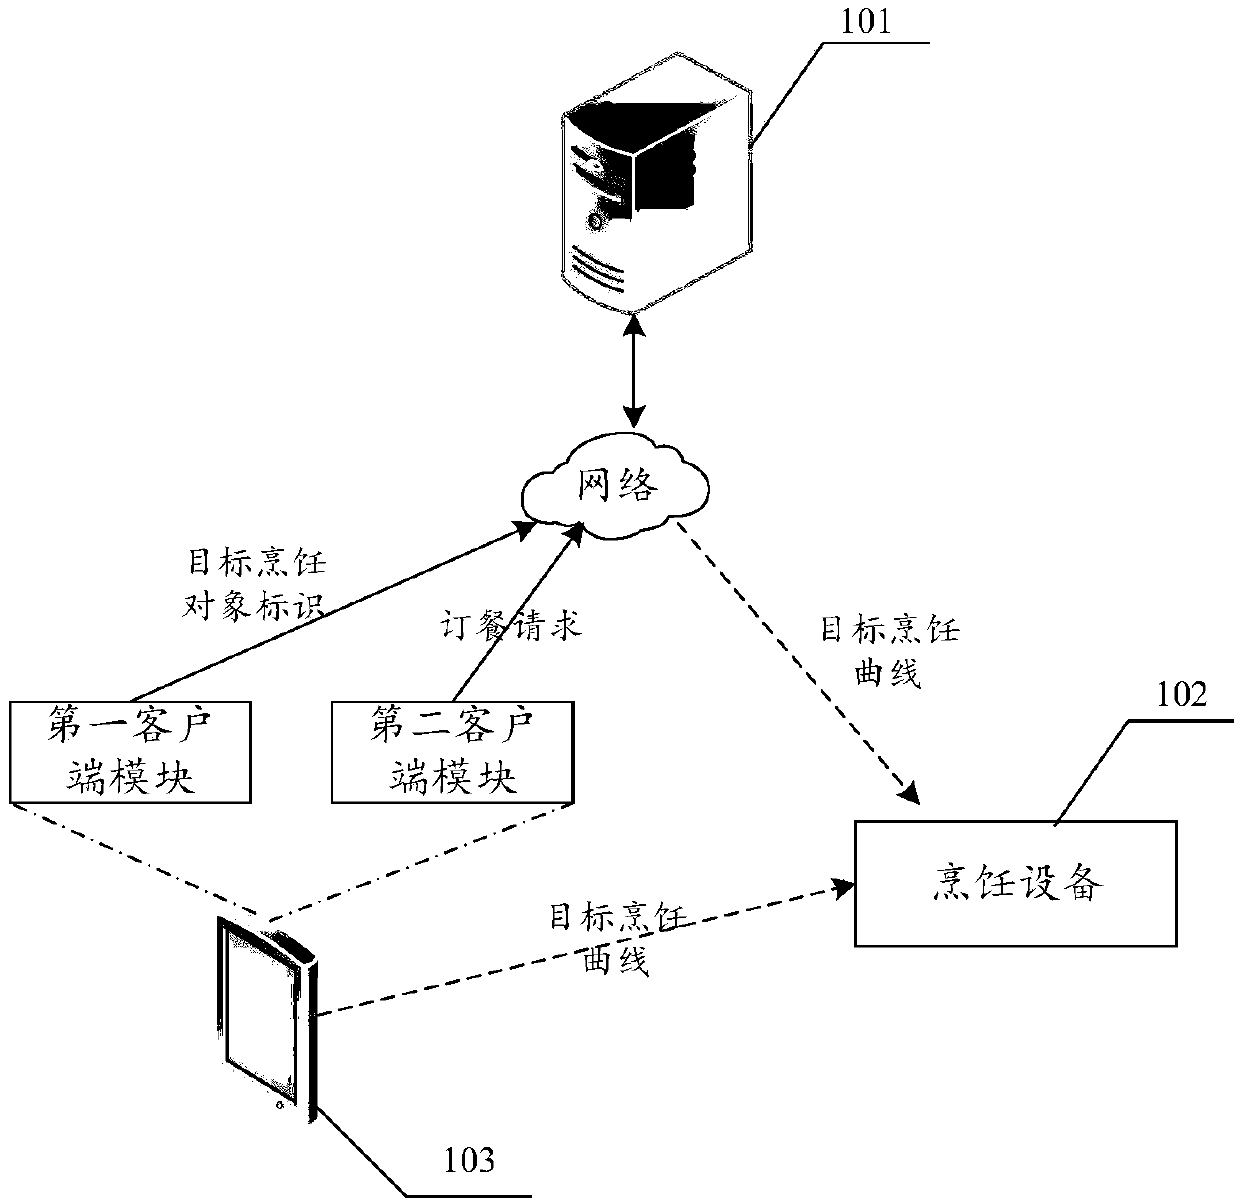 Cooking information processing method, device and system